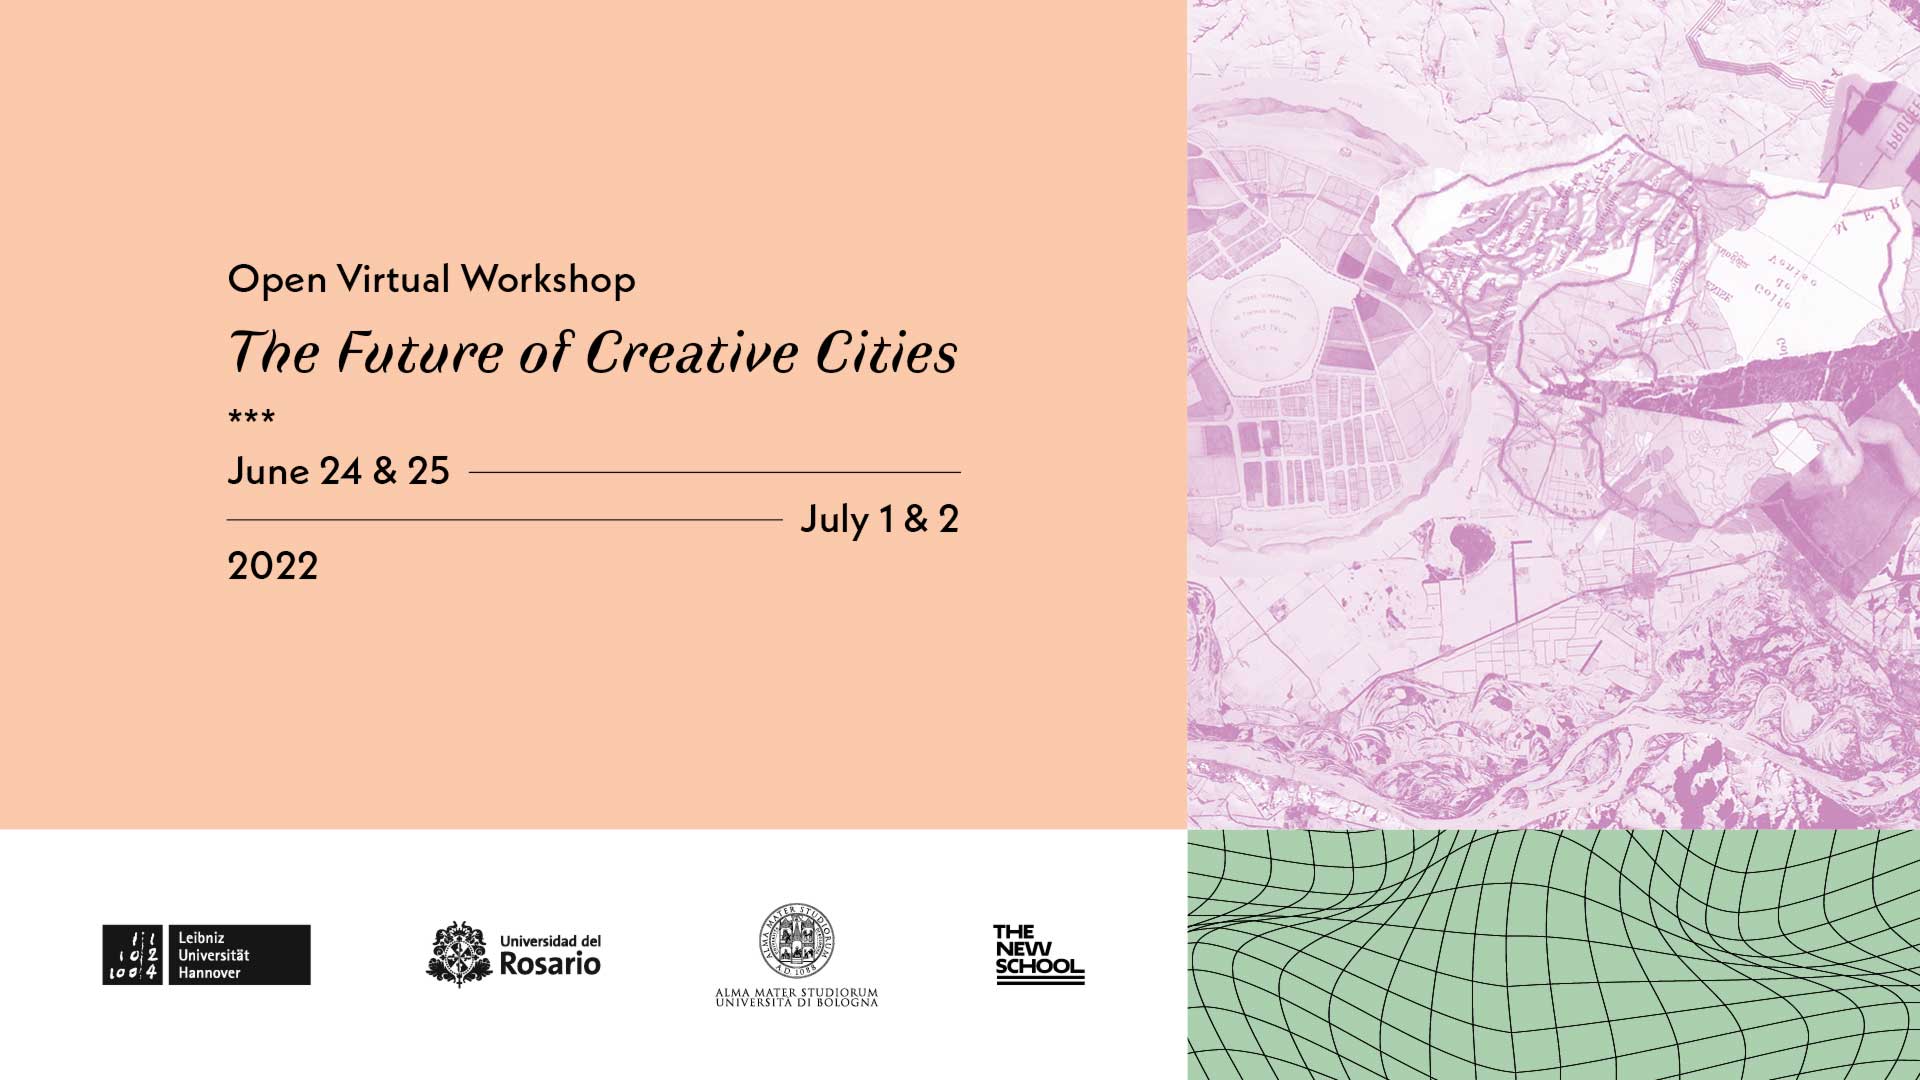 The Future of Creative Cities